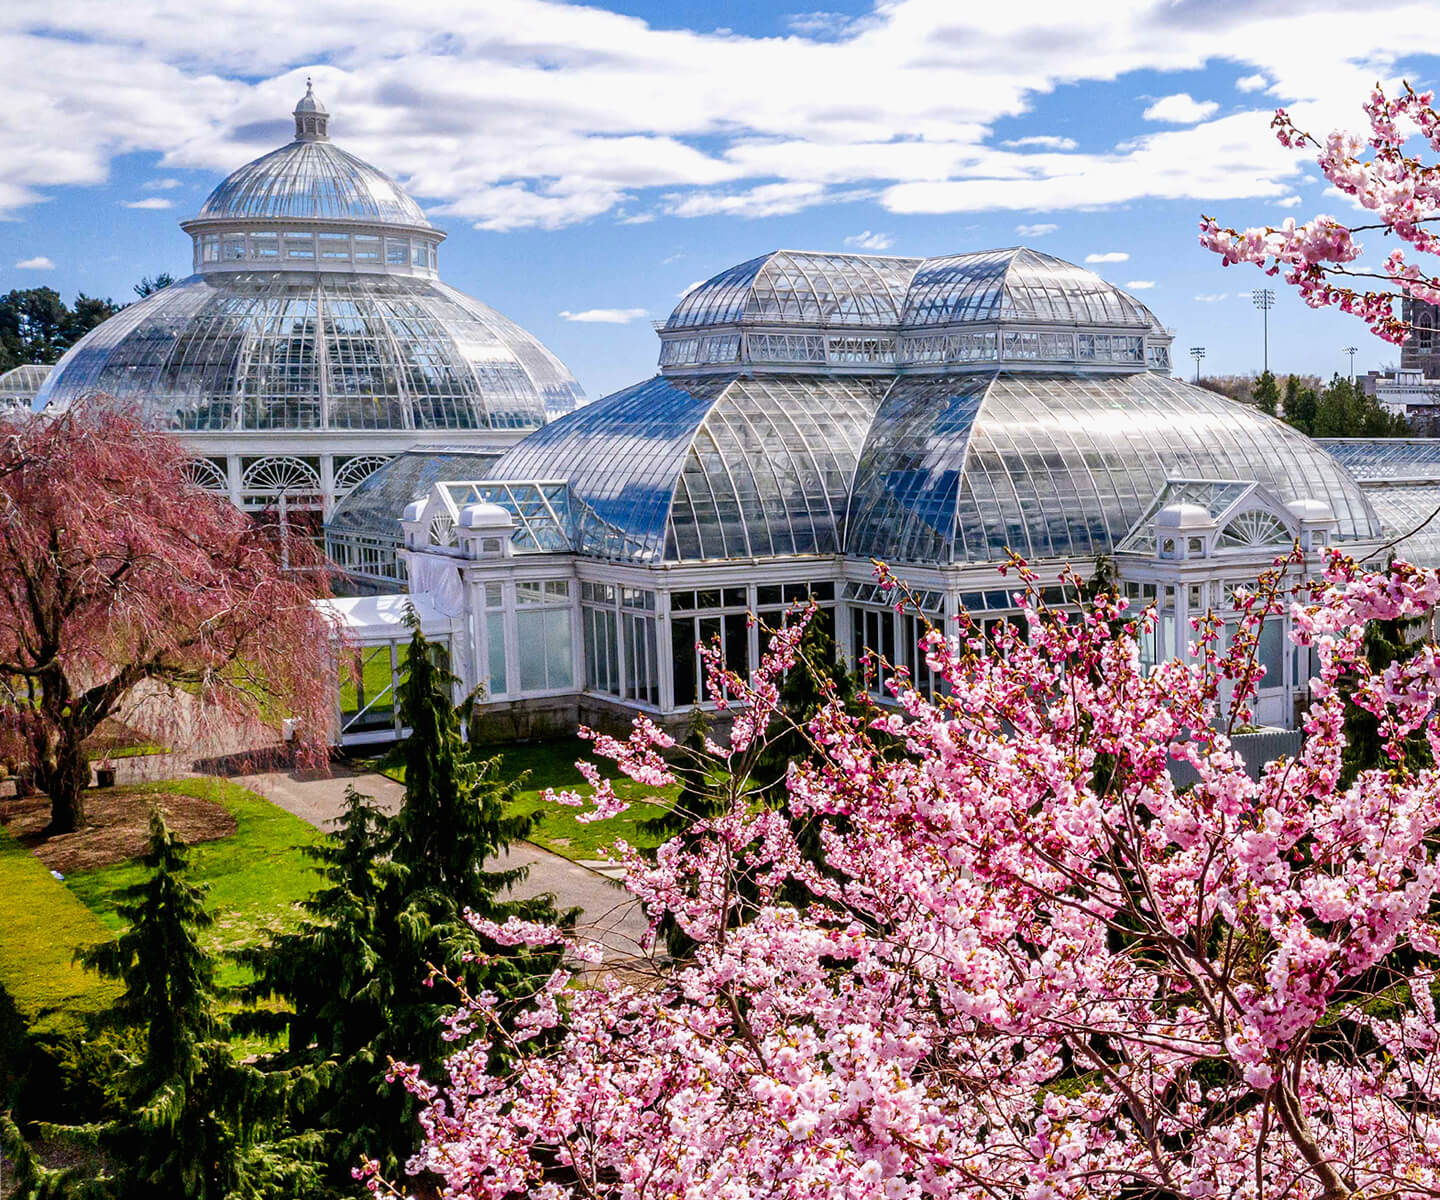 The New York Botanical Garden Enid A. Haupt Conservatory from in spring with blooming Cherry Blossom trees.